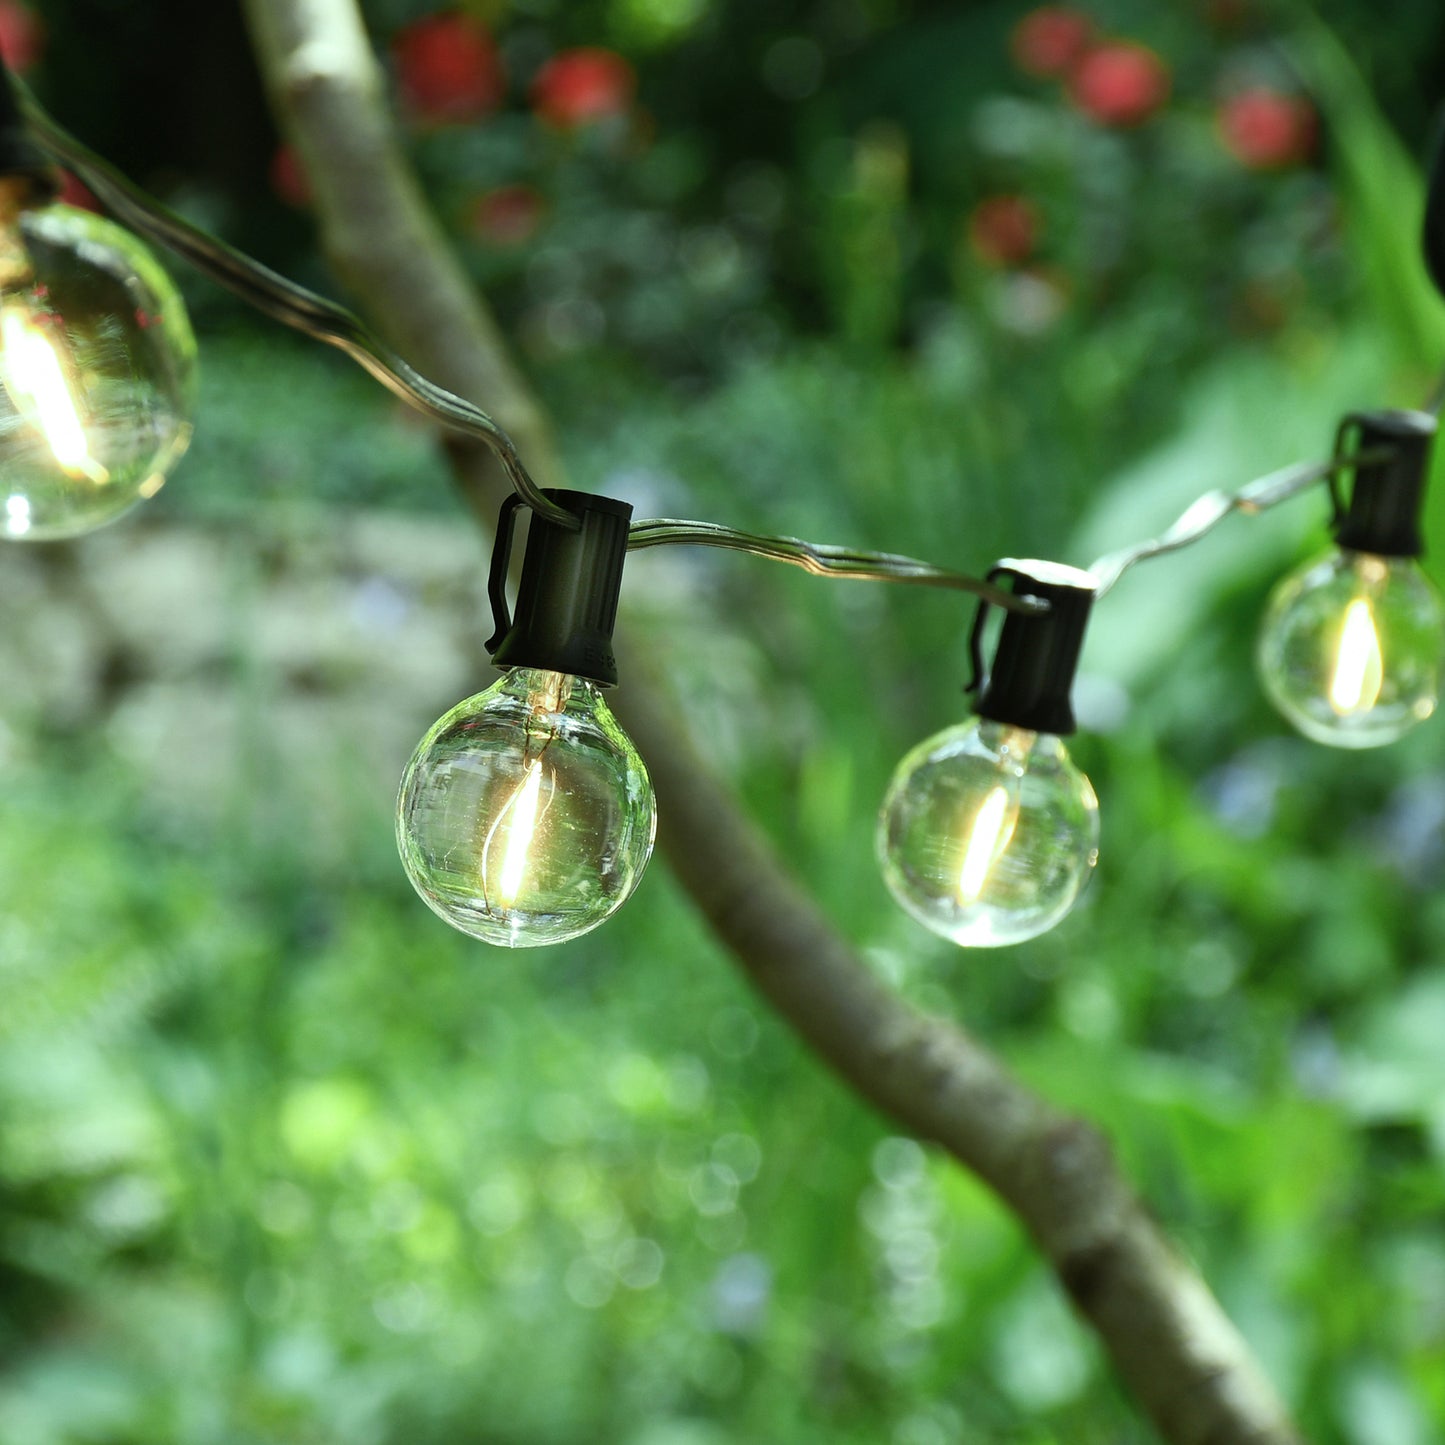 Electric LED Globe String Lights with 25 Clear Bulbs